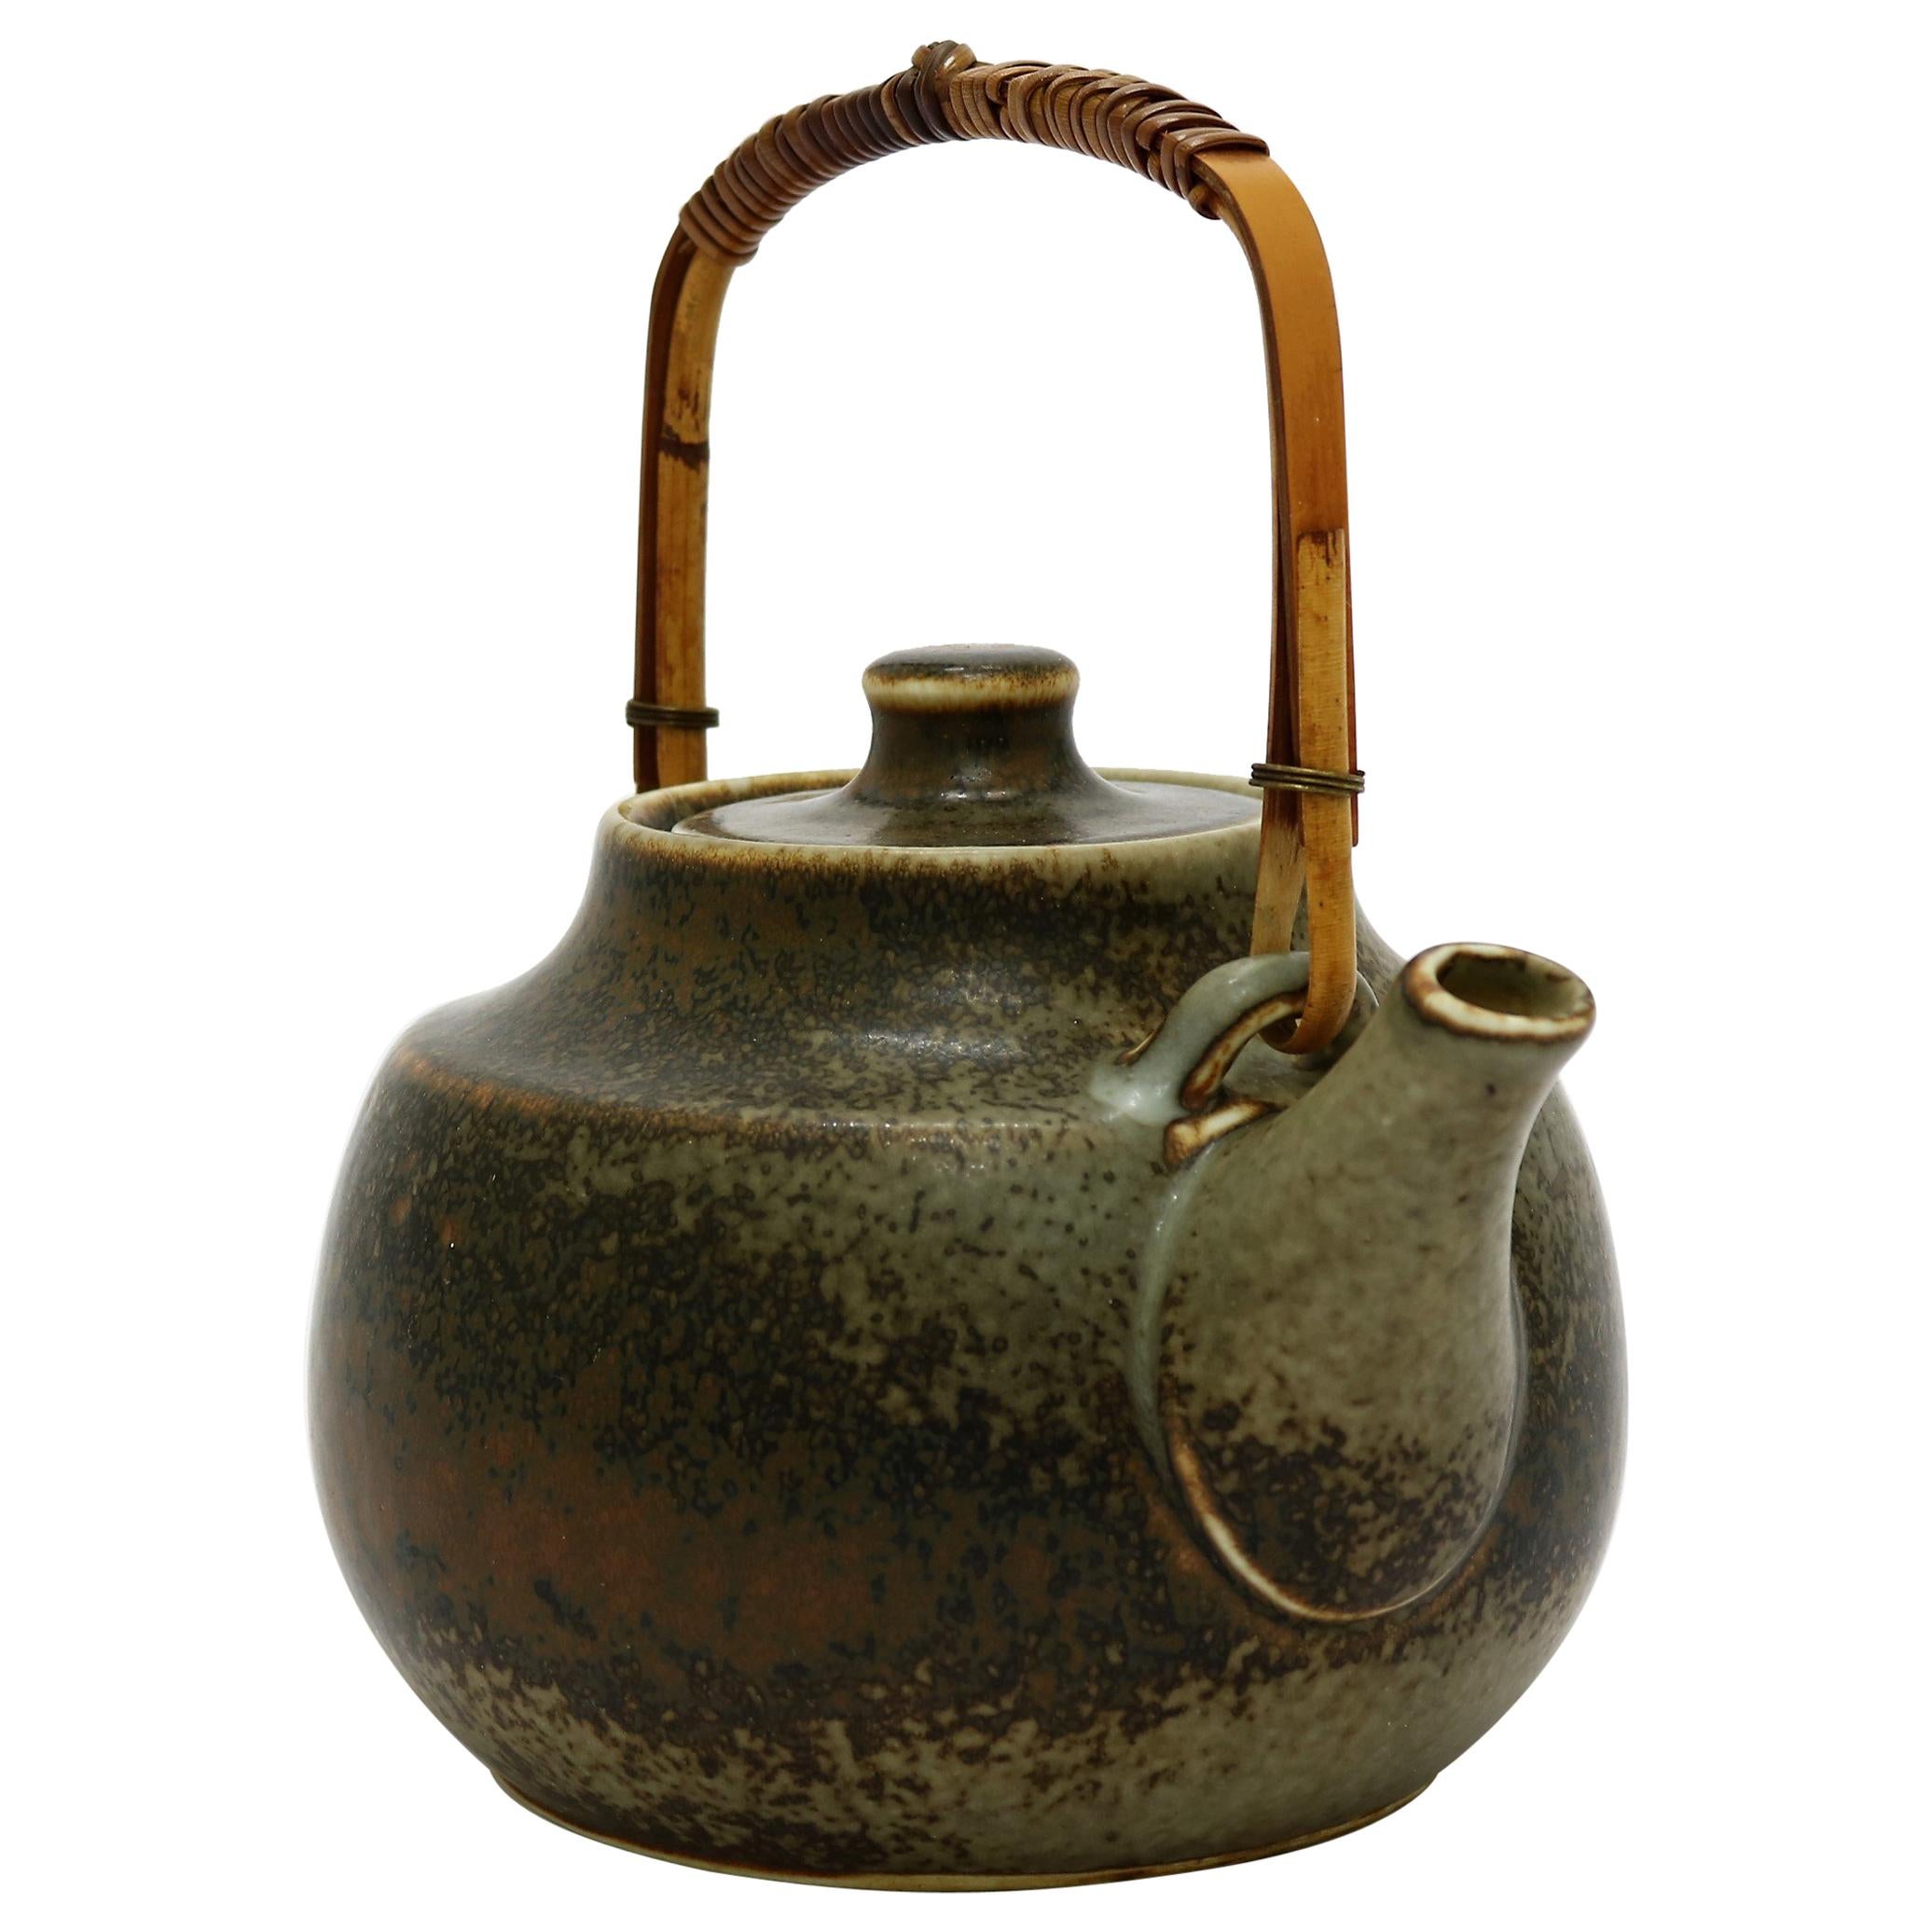 Carl-Harry Stalhane Stoneware Tea Pot Made at Rörstrand, Sweden in the 1960s